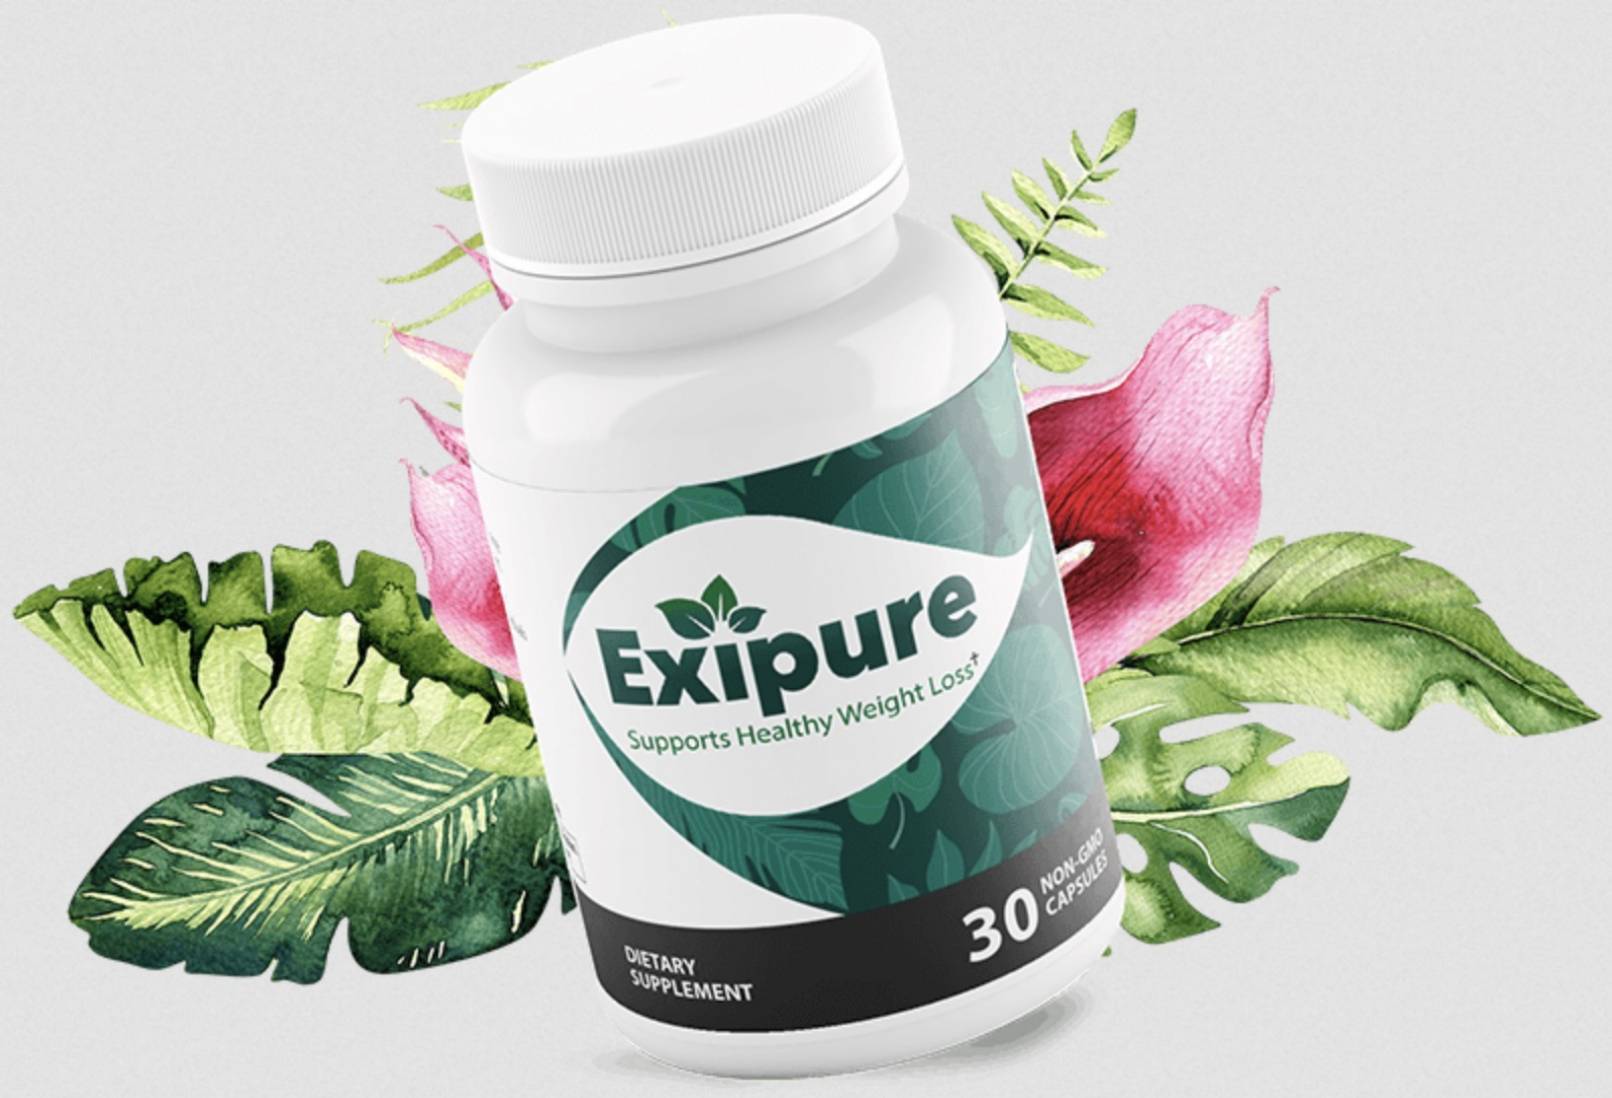 does Exipure really work and is it safe